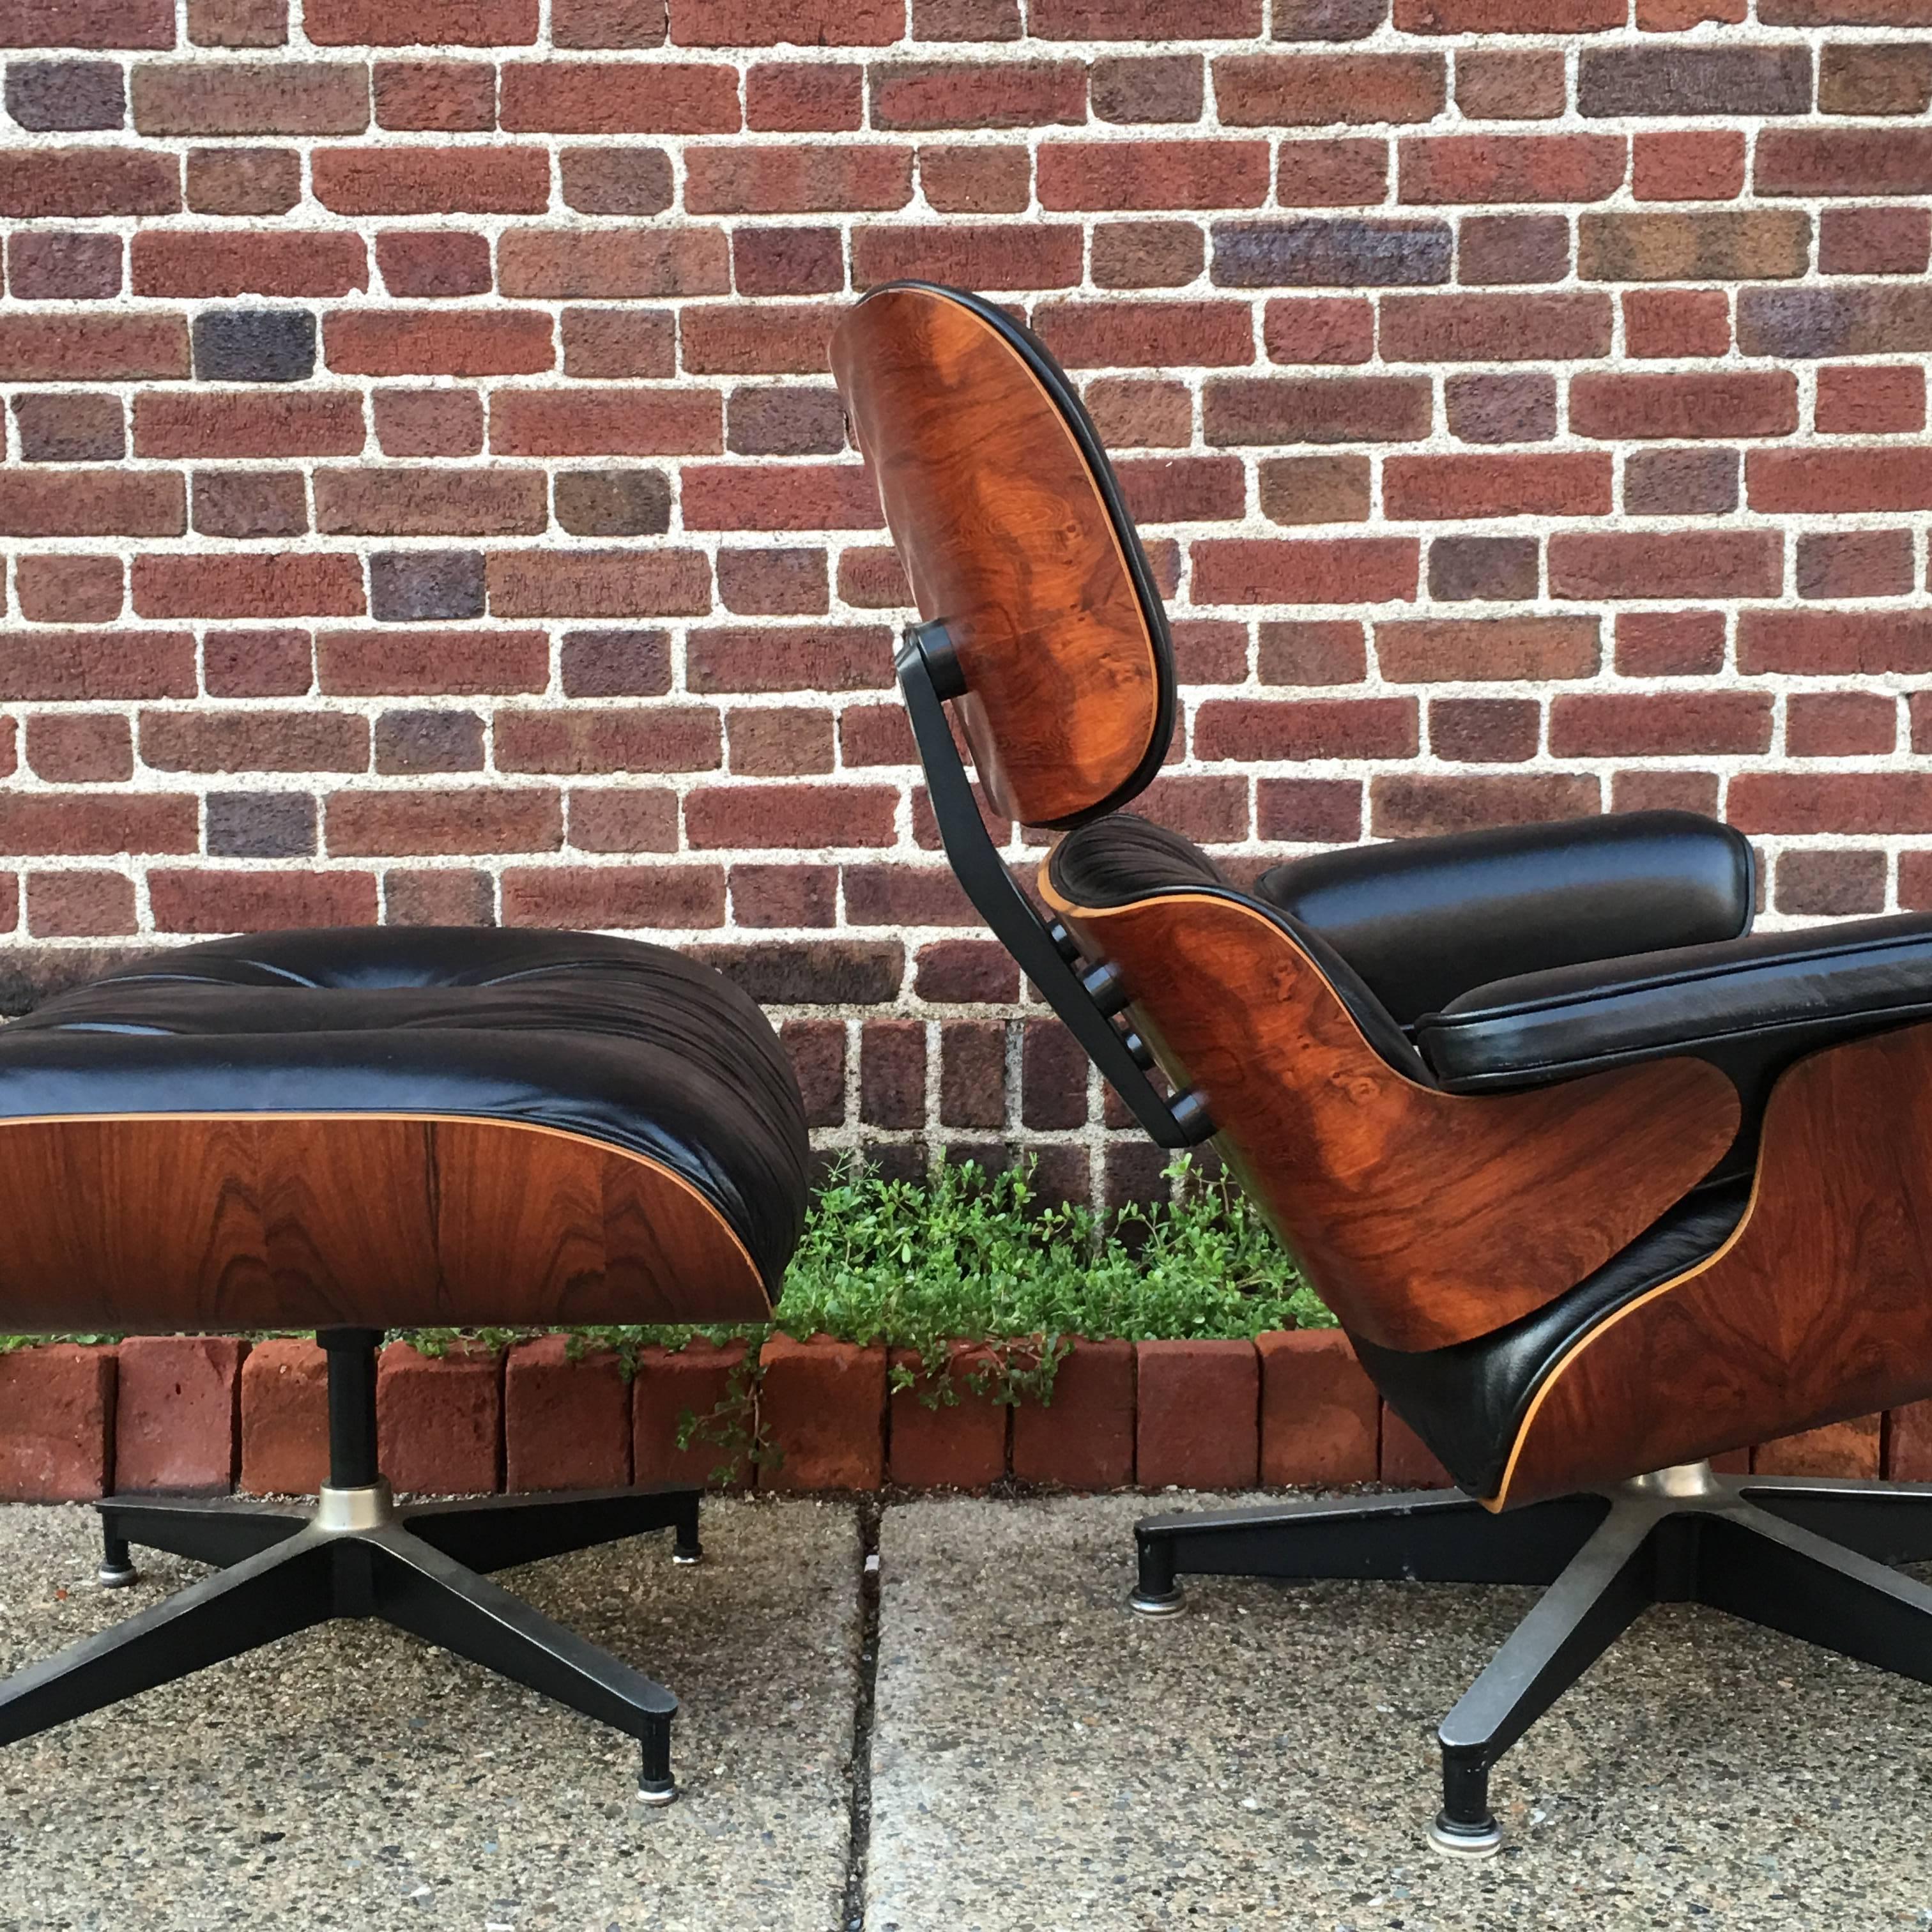 1970s Herman Miller Eames lounge with dramatic and highly figured rosewood panels. Amazing depth of color and contrast with no bleaching or damage. Original black cushions. Leather in very good condition with minor wear but no cracks. Chair is all